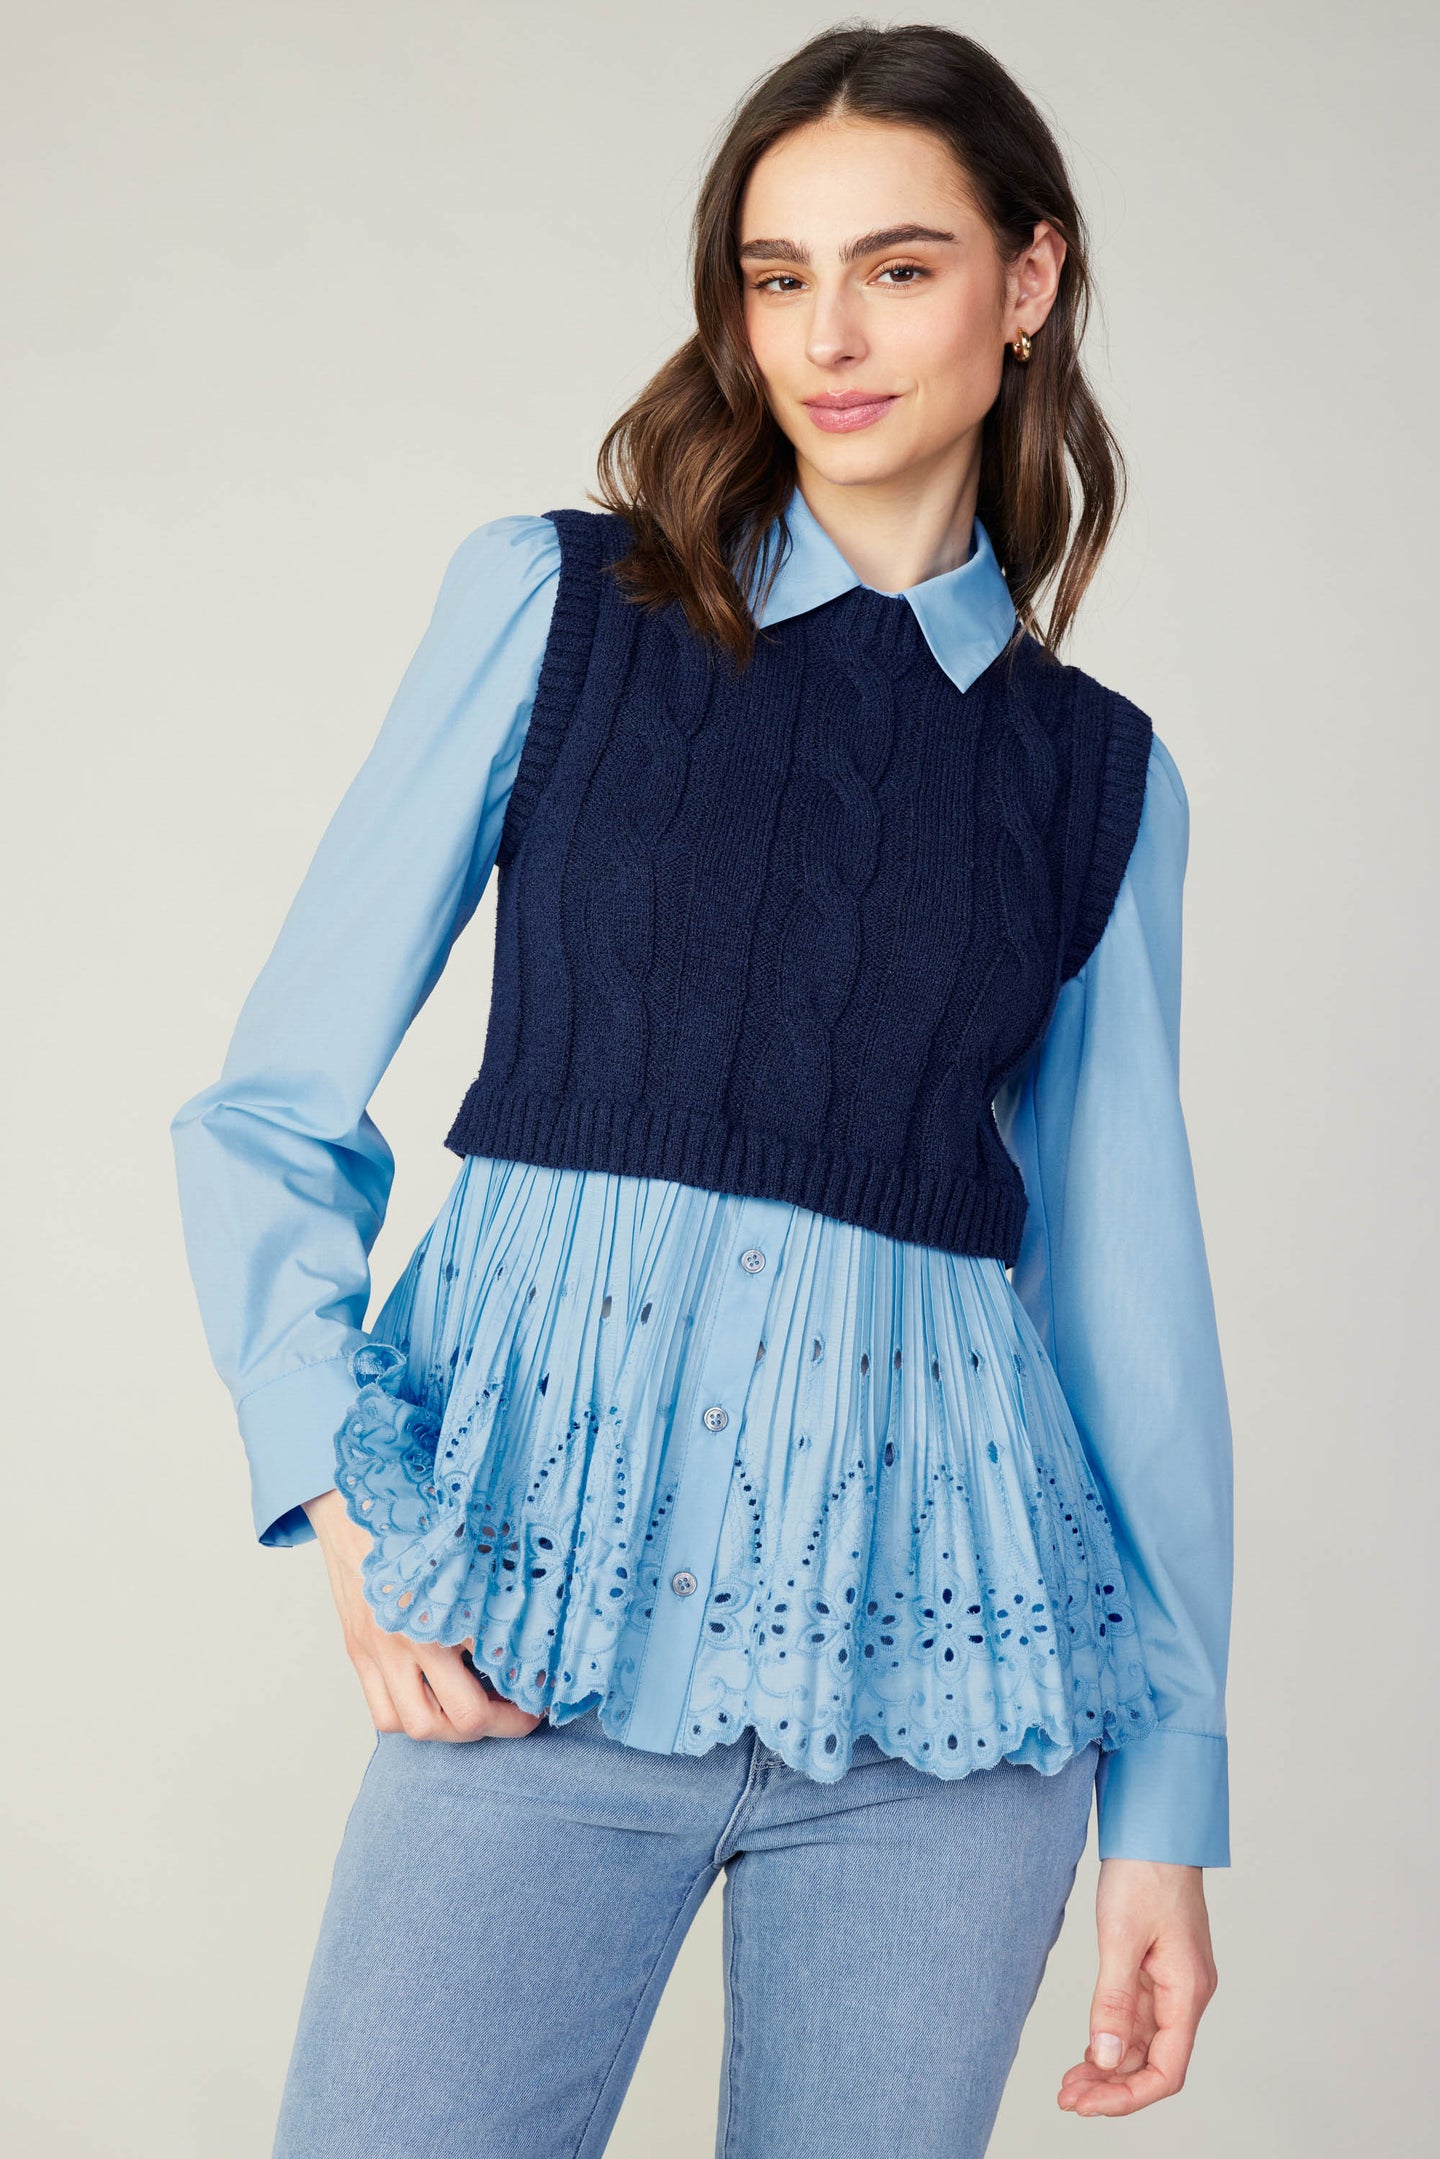 Contrast Knit Eyelet Top